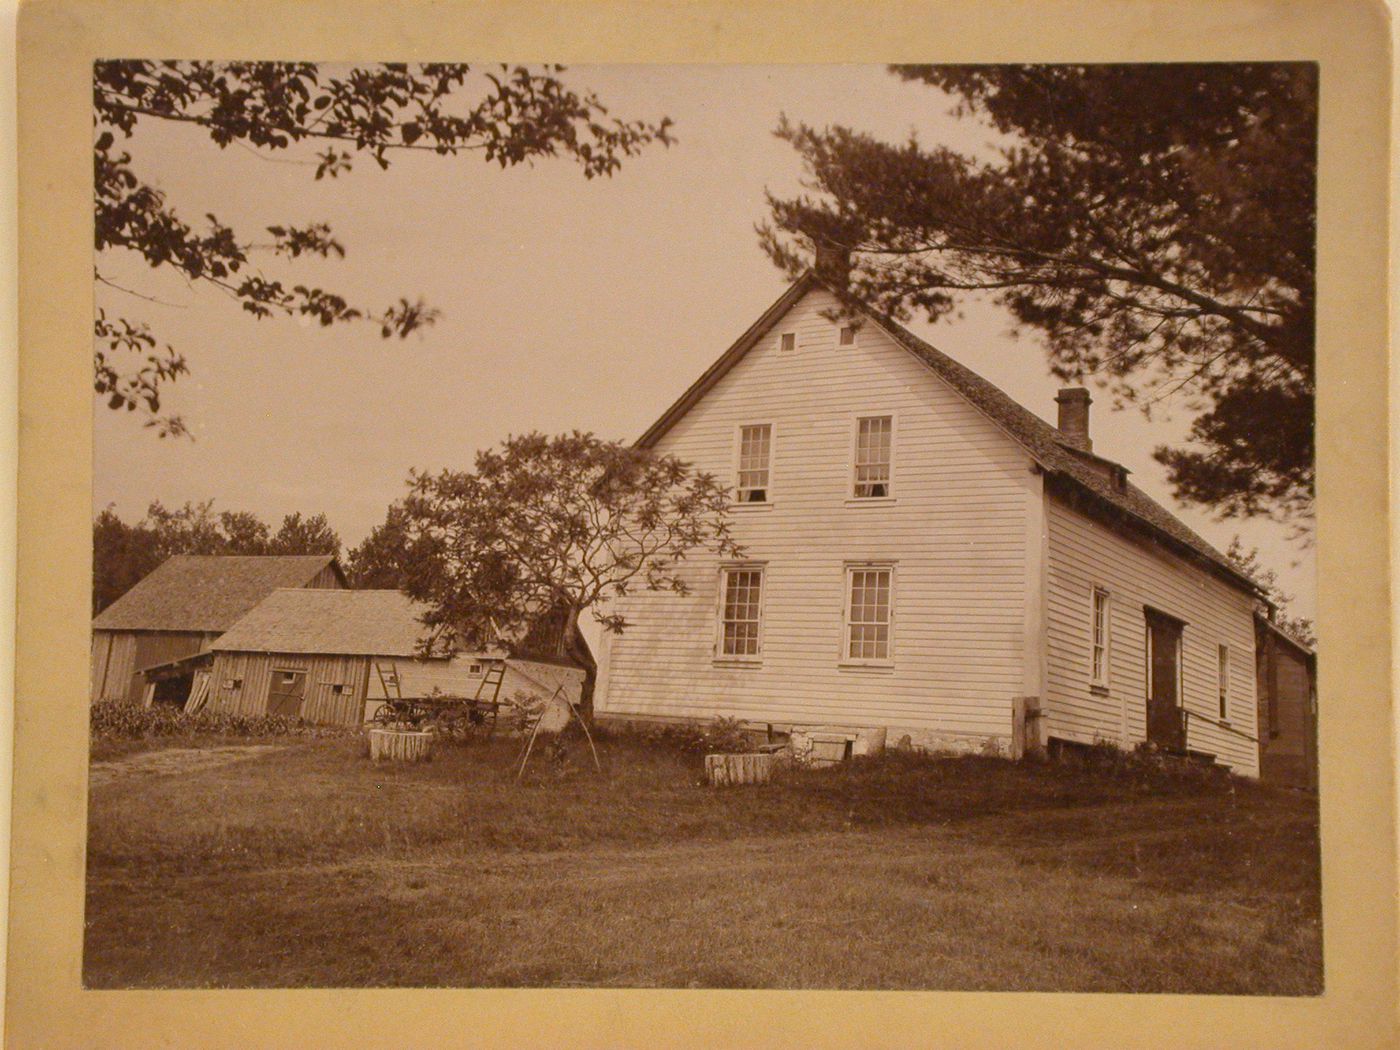 View of a farm house, New York ?, United States